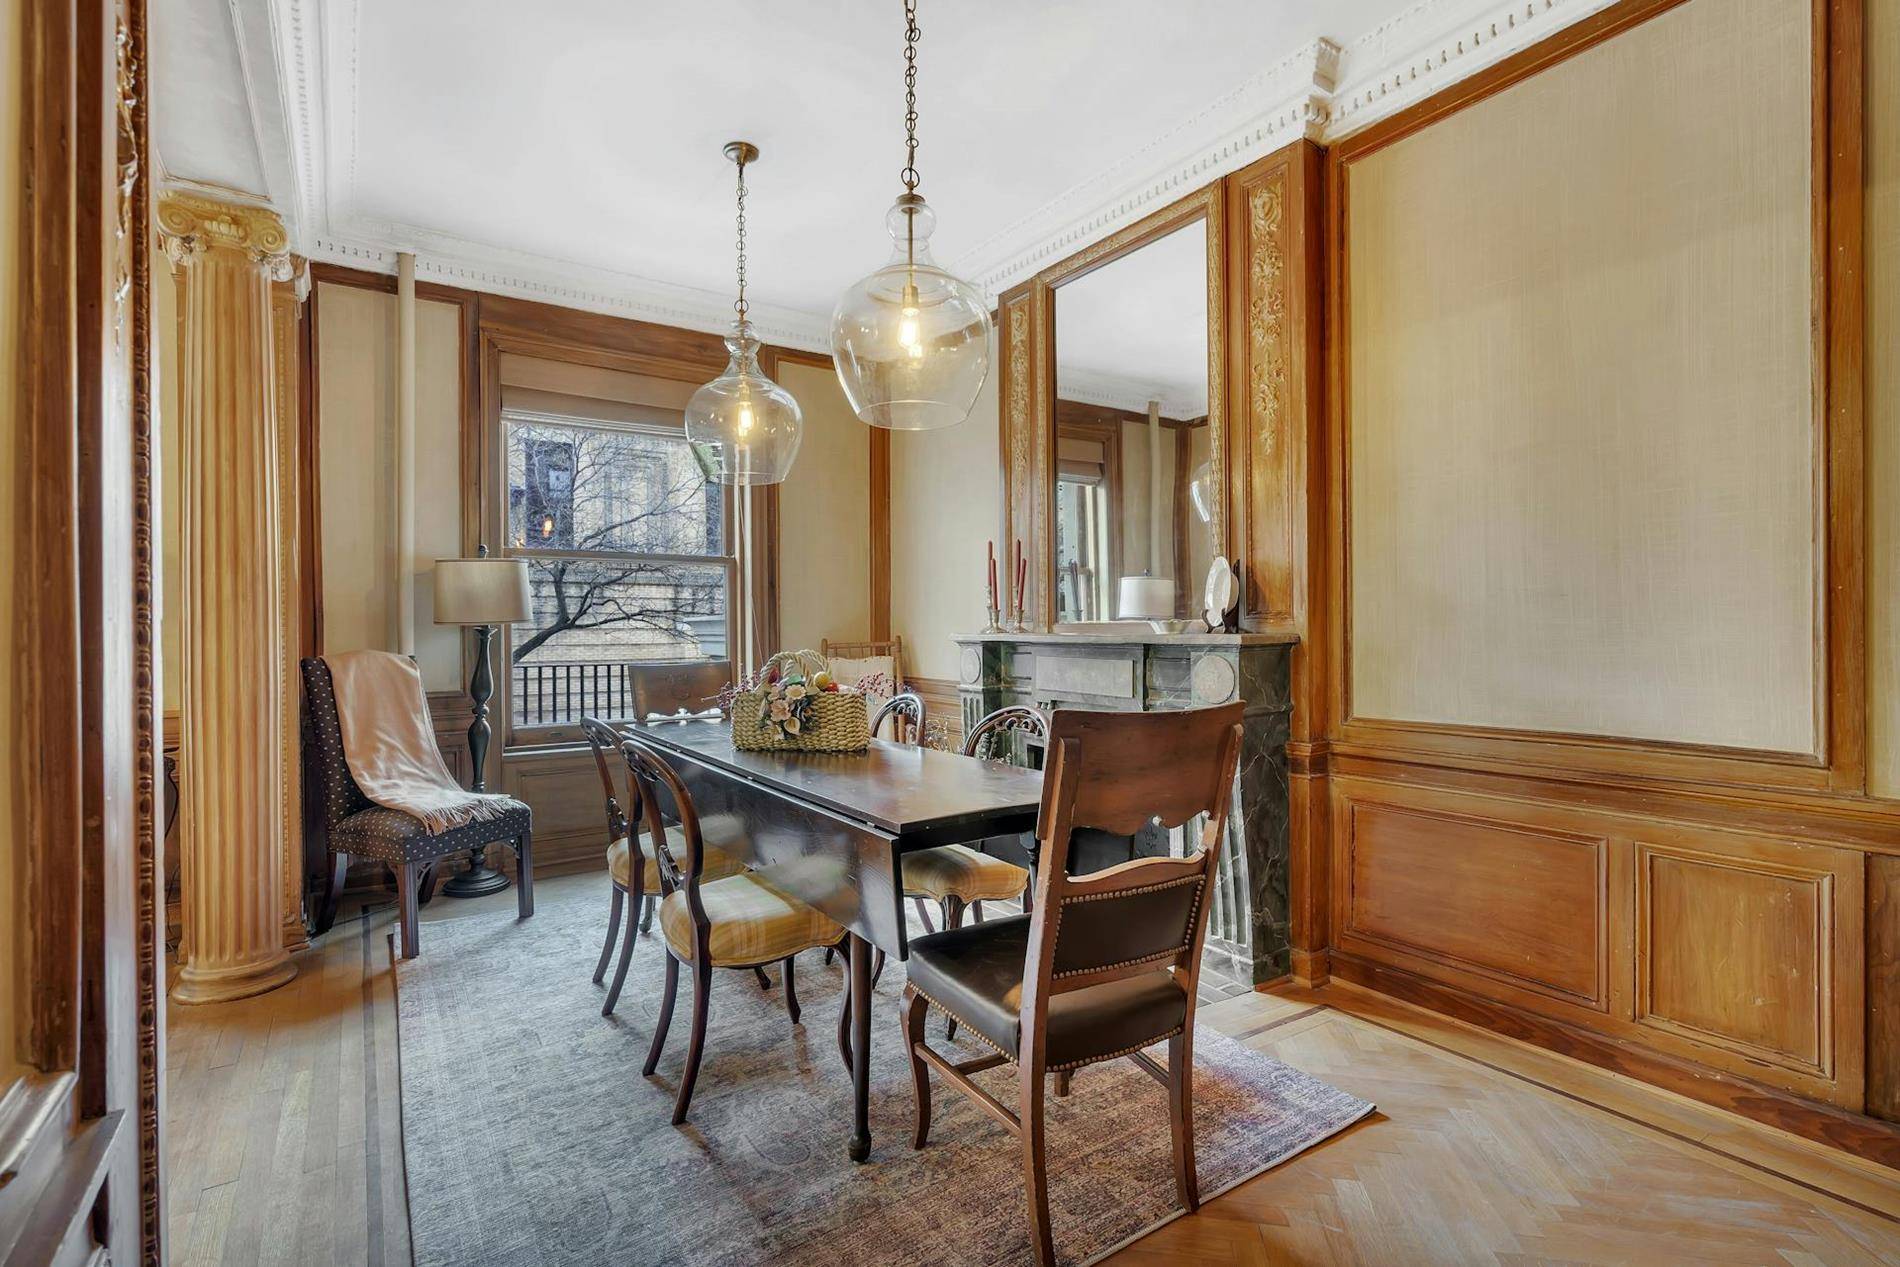 Step into a piece of history at 250 West 82nd St Apt 21, located in The Saxony, the first residential building designed by eminent architect Emery Roth.